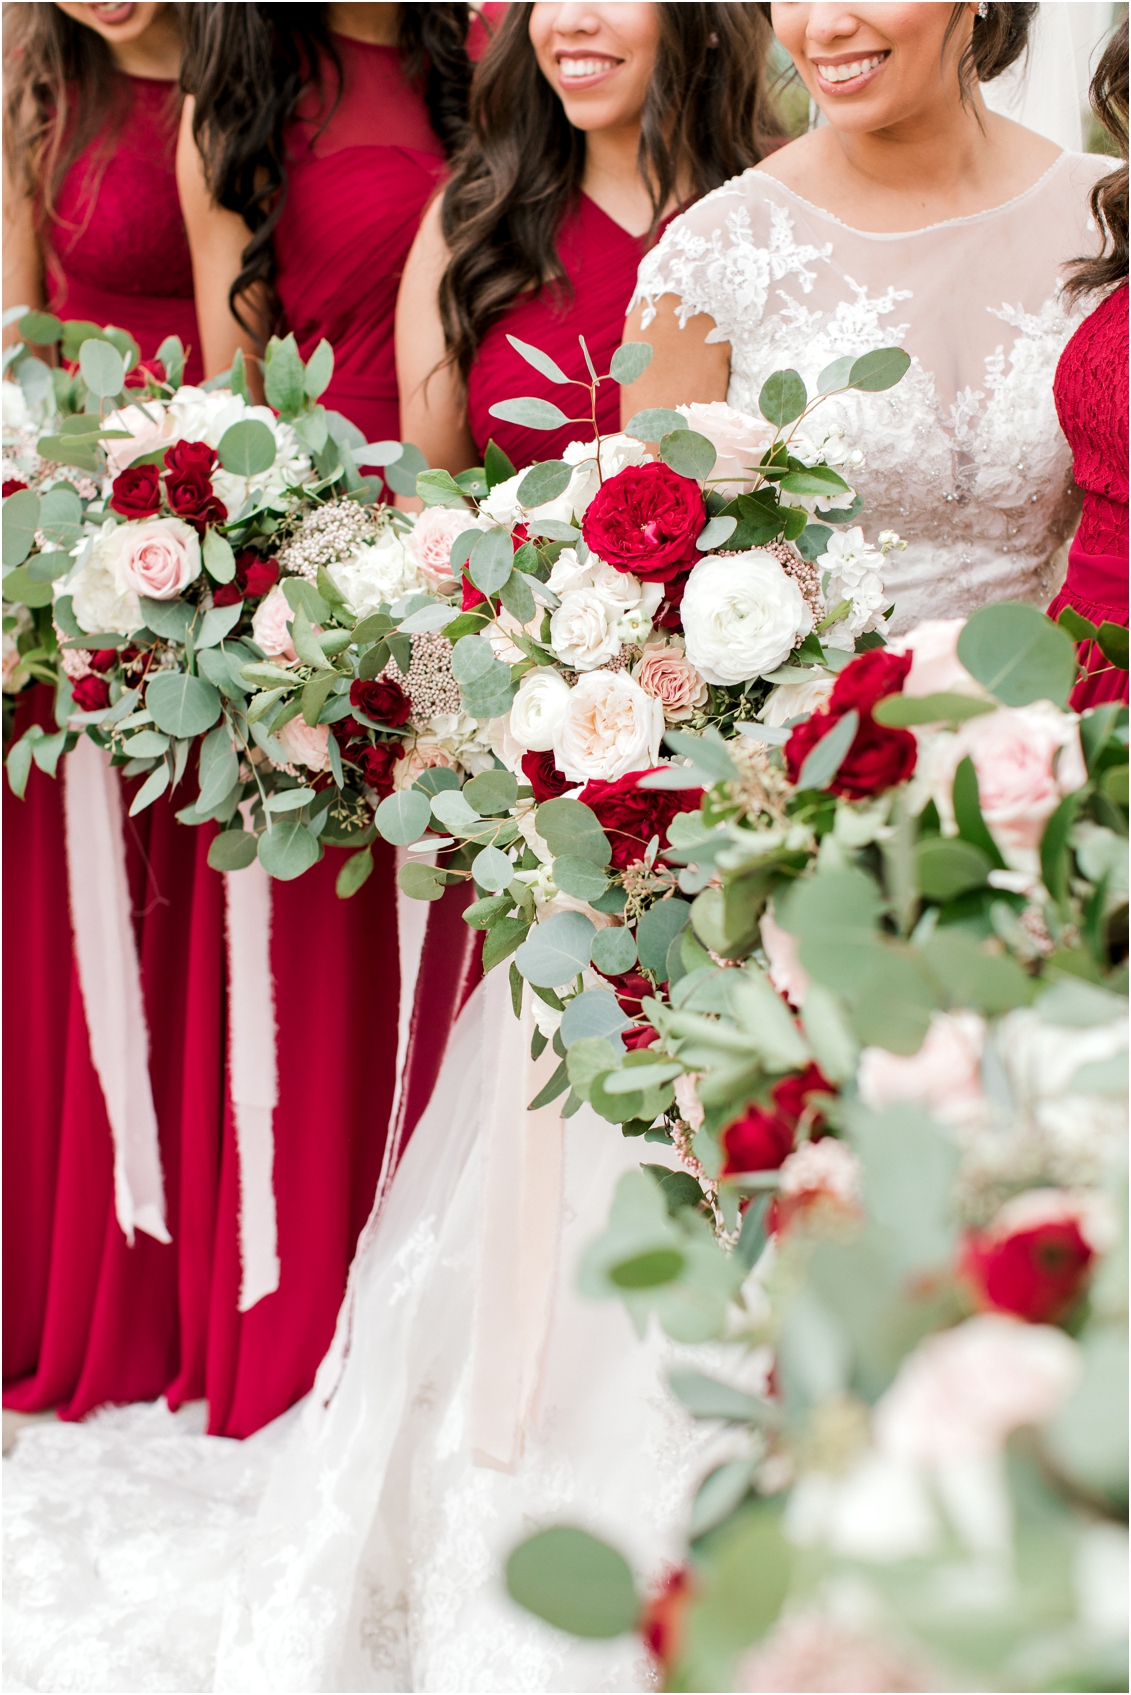 A Wedding at the Milestone in Denton, Texas by Gaby Caskey Photography, red wedding bouquets